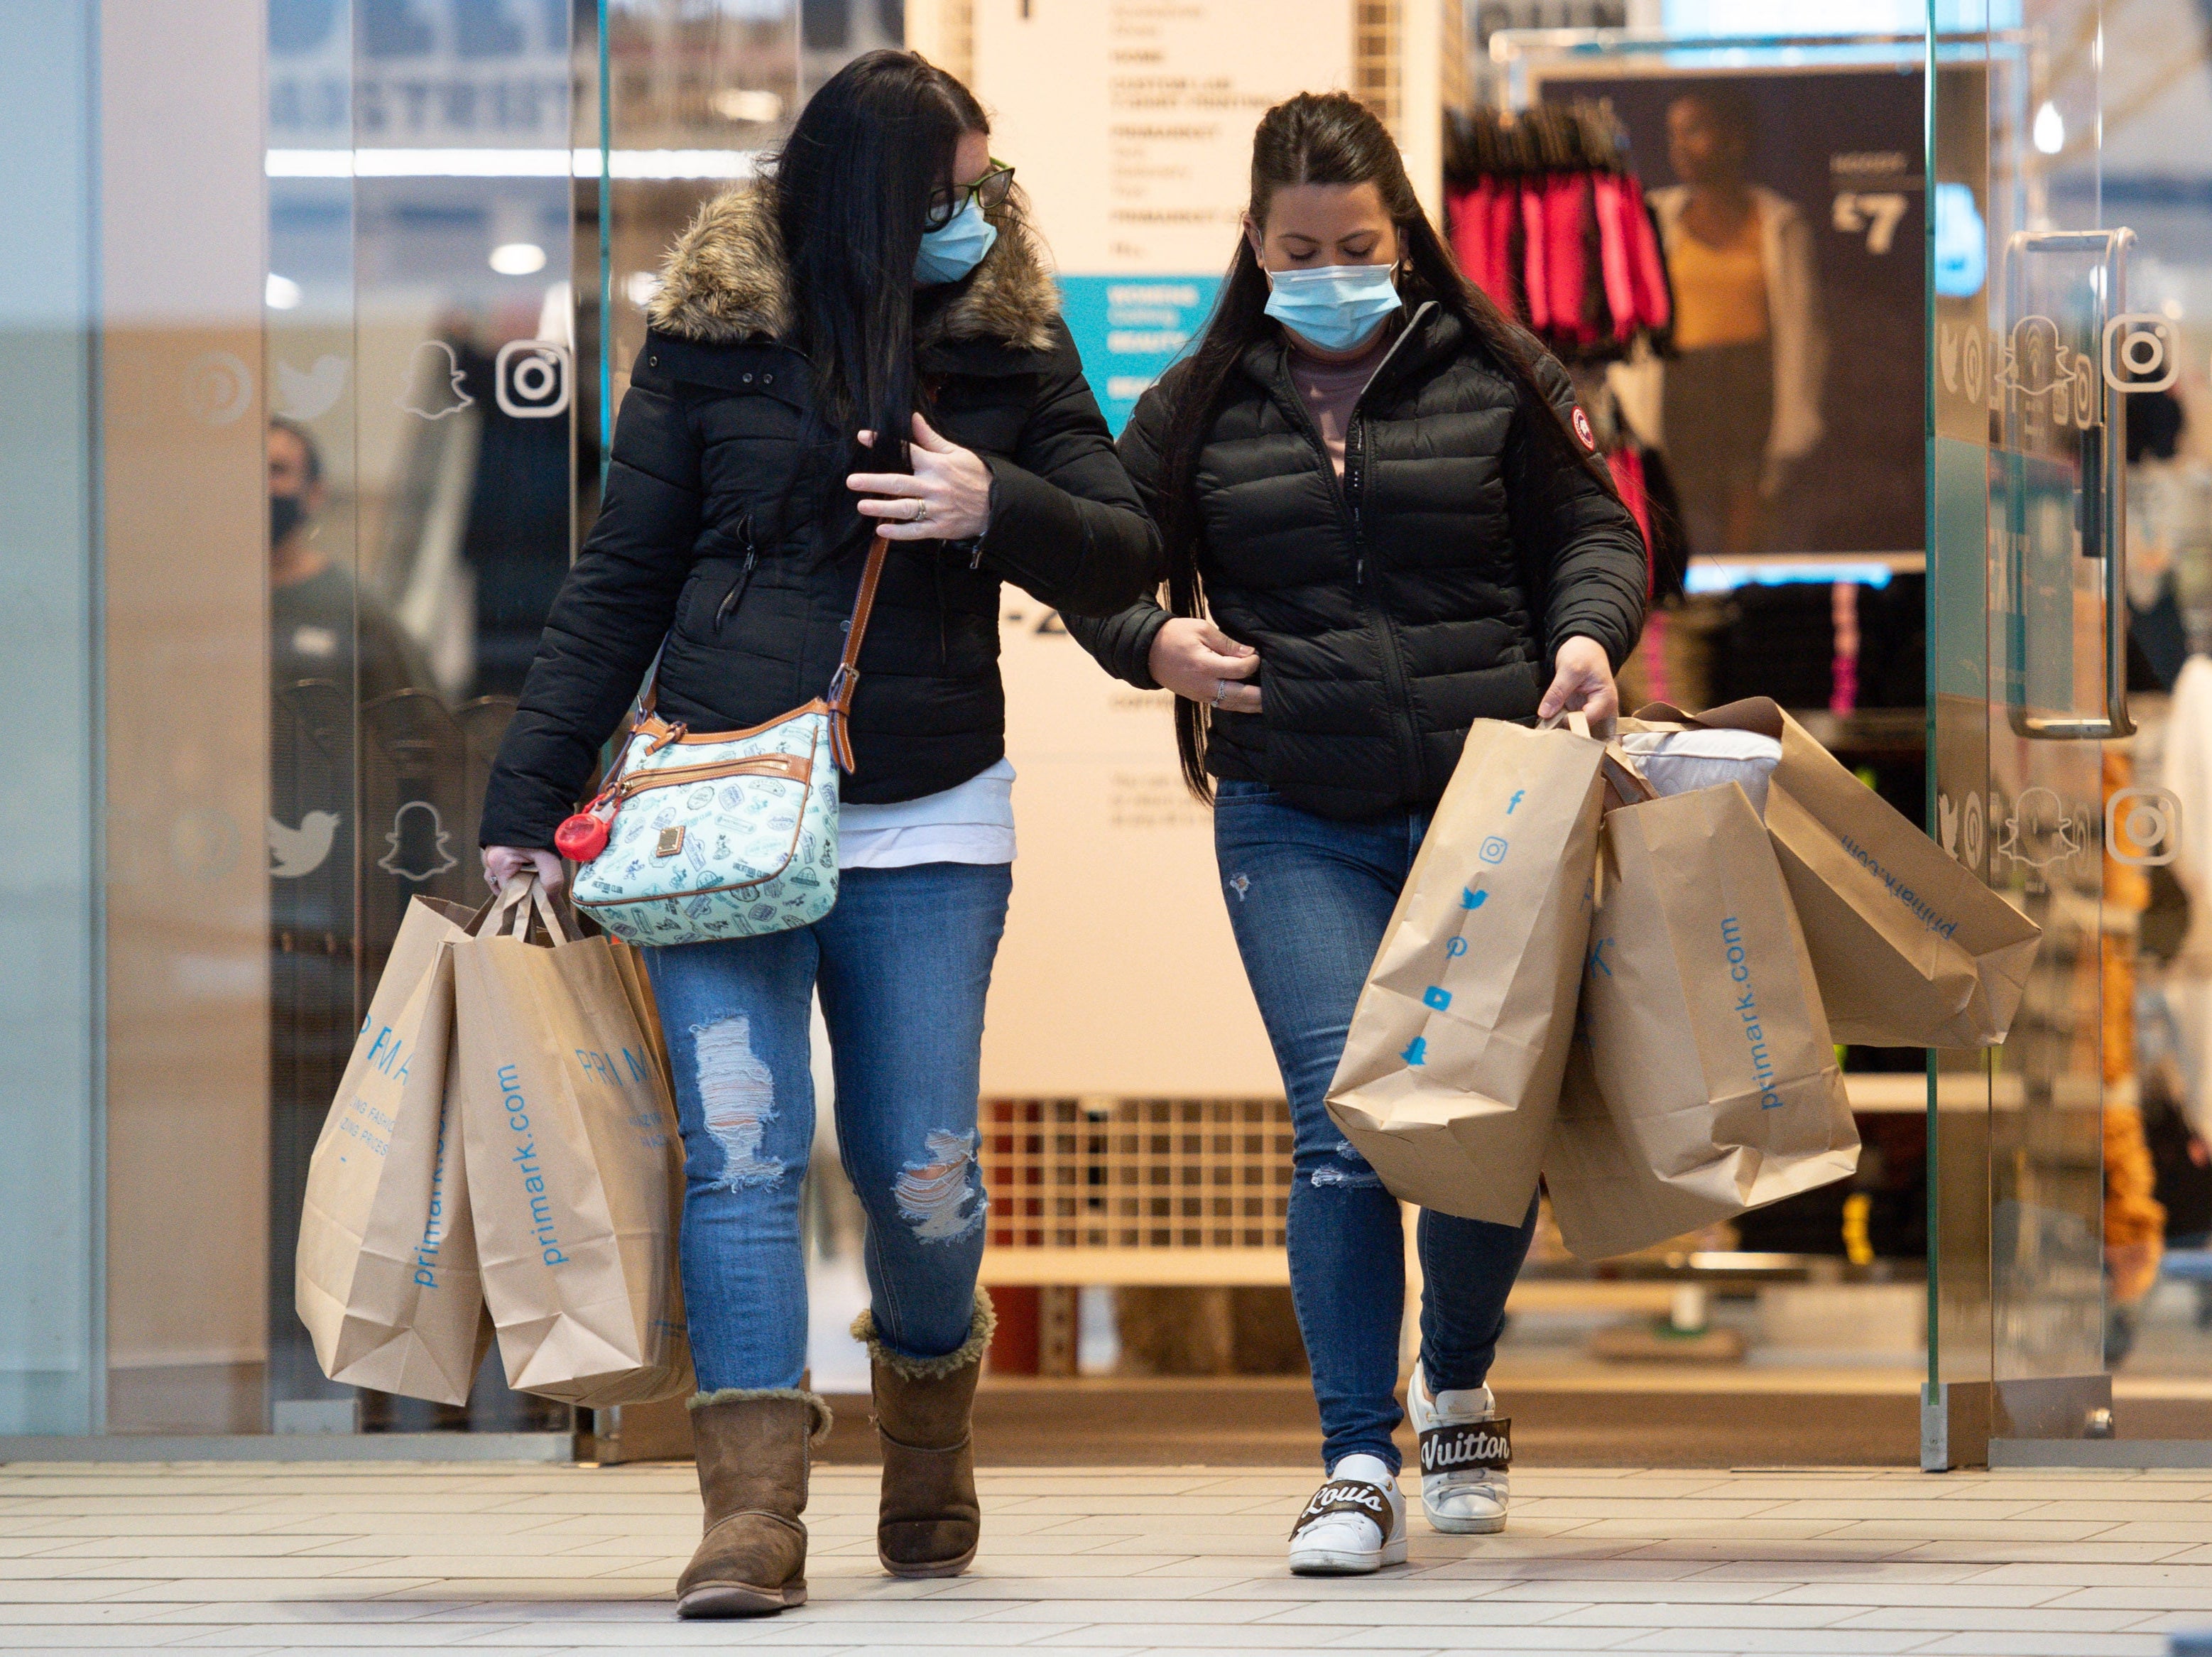 Visits to clothes stores still lag far behind pre-pandemic norms